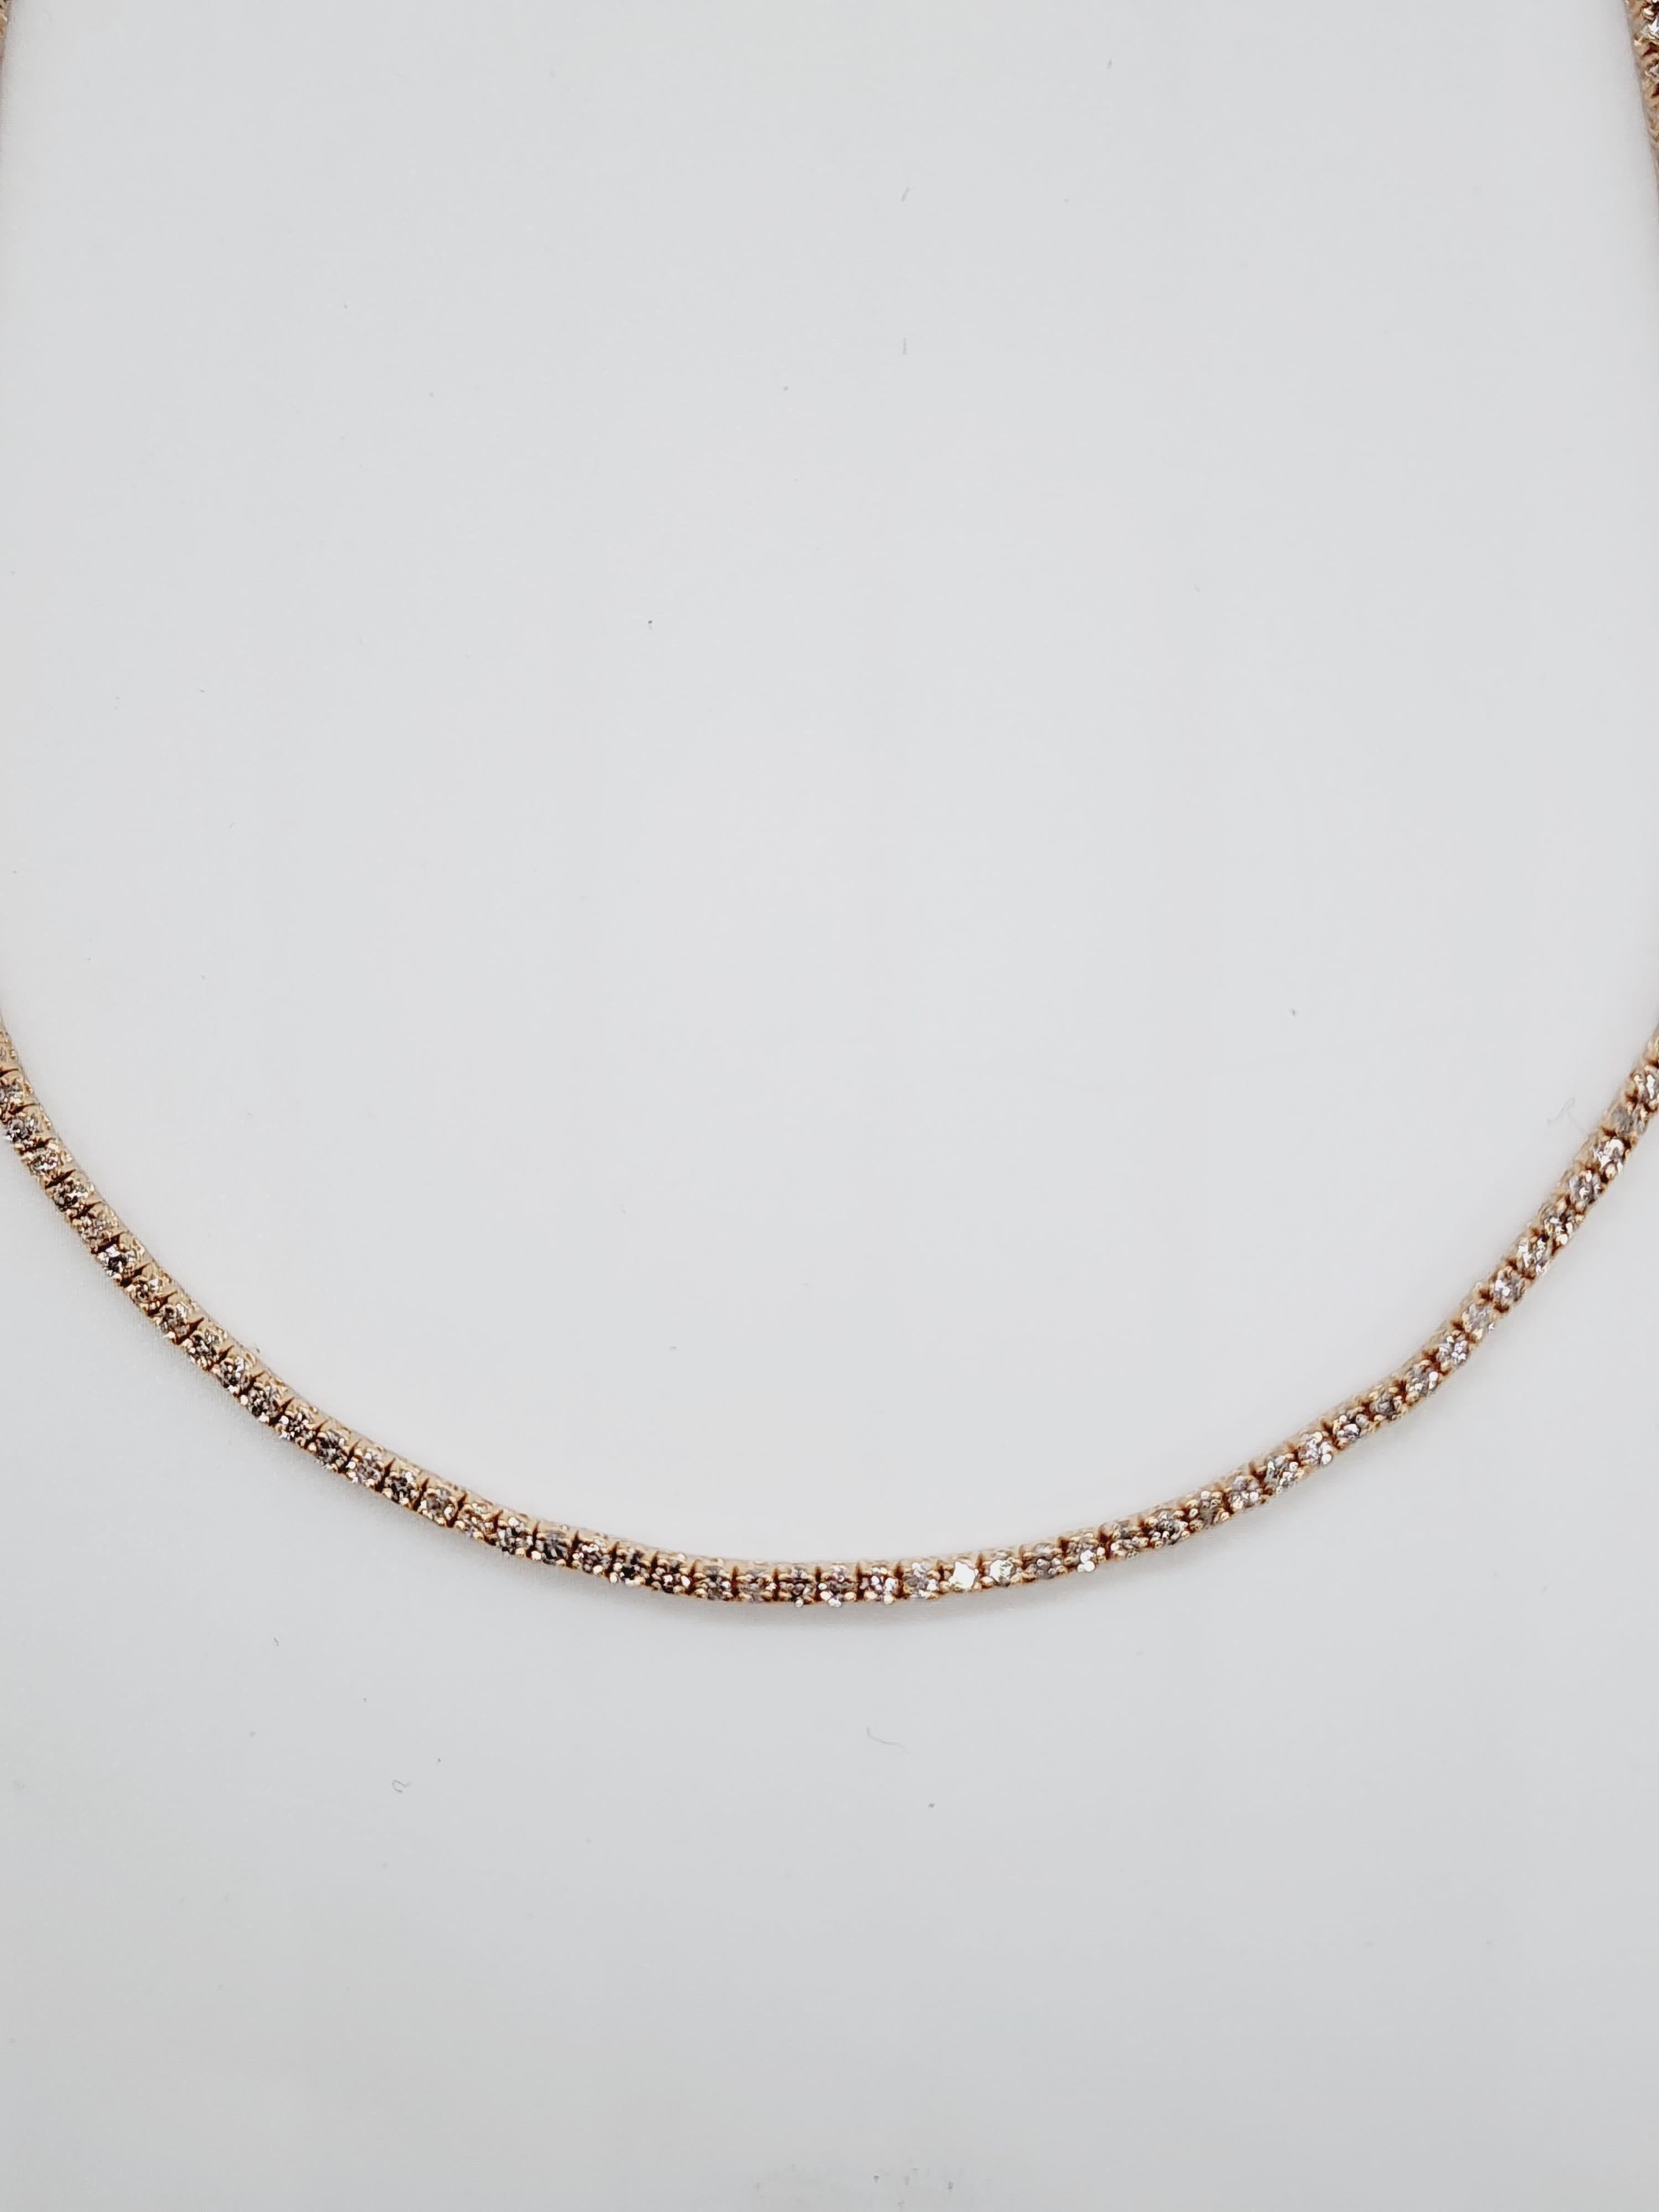 3.11 Carat Round Brilliant Cut Diamond Tennis Necklace 14 Karat Rose Gold 16'' In New Condition For Sale In Great Neck, NY